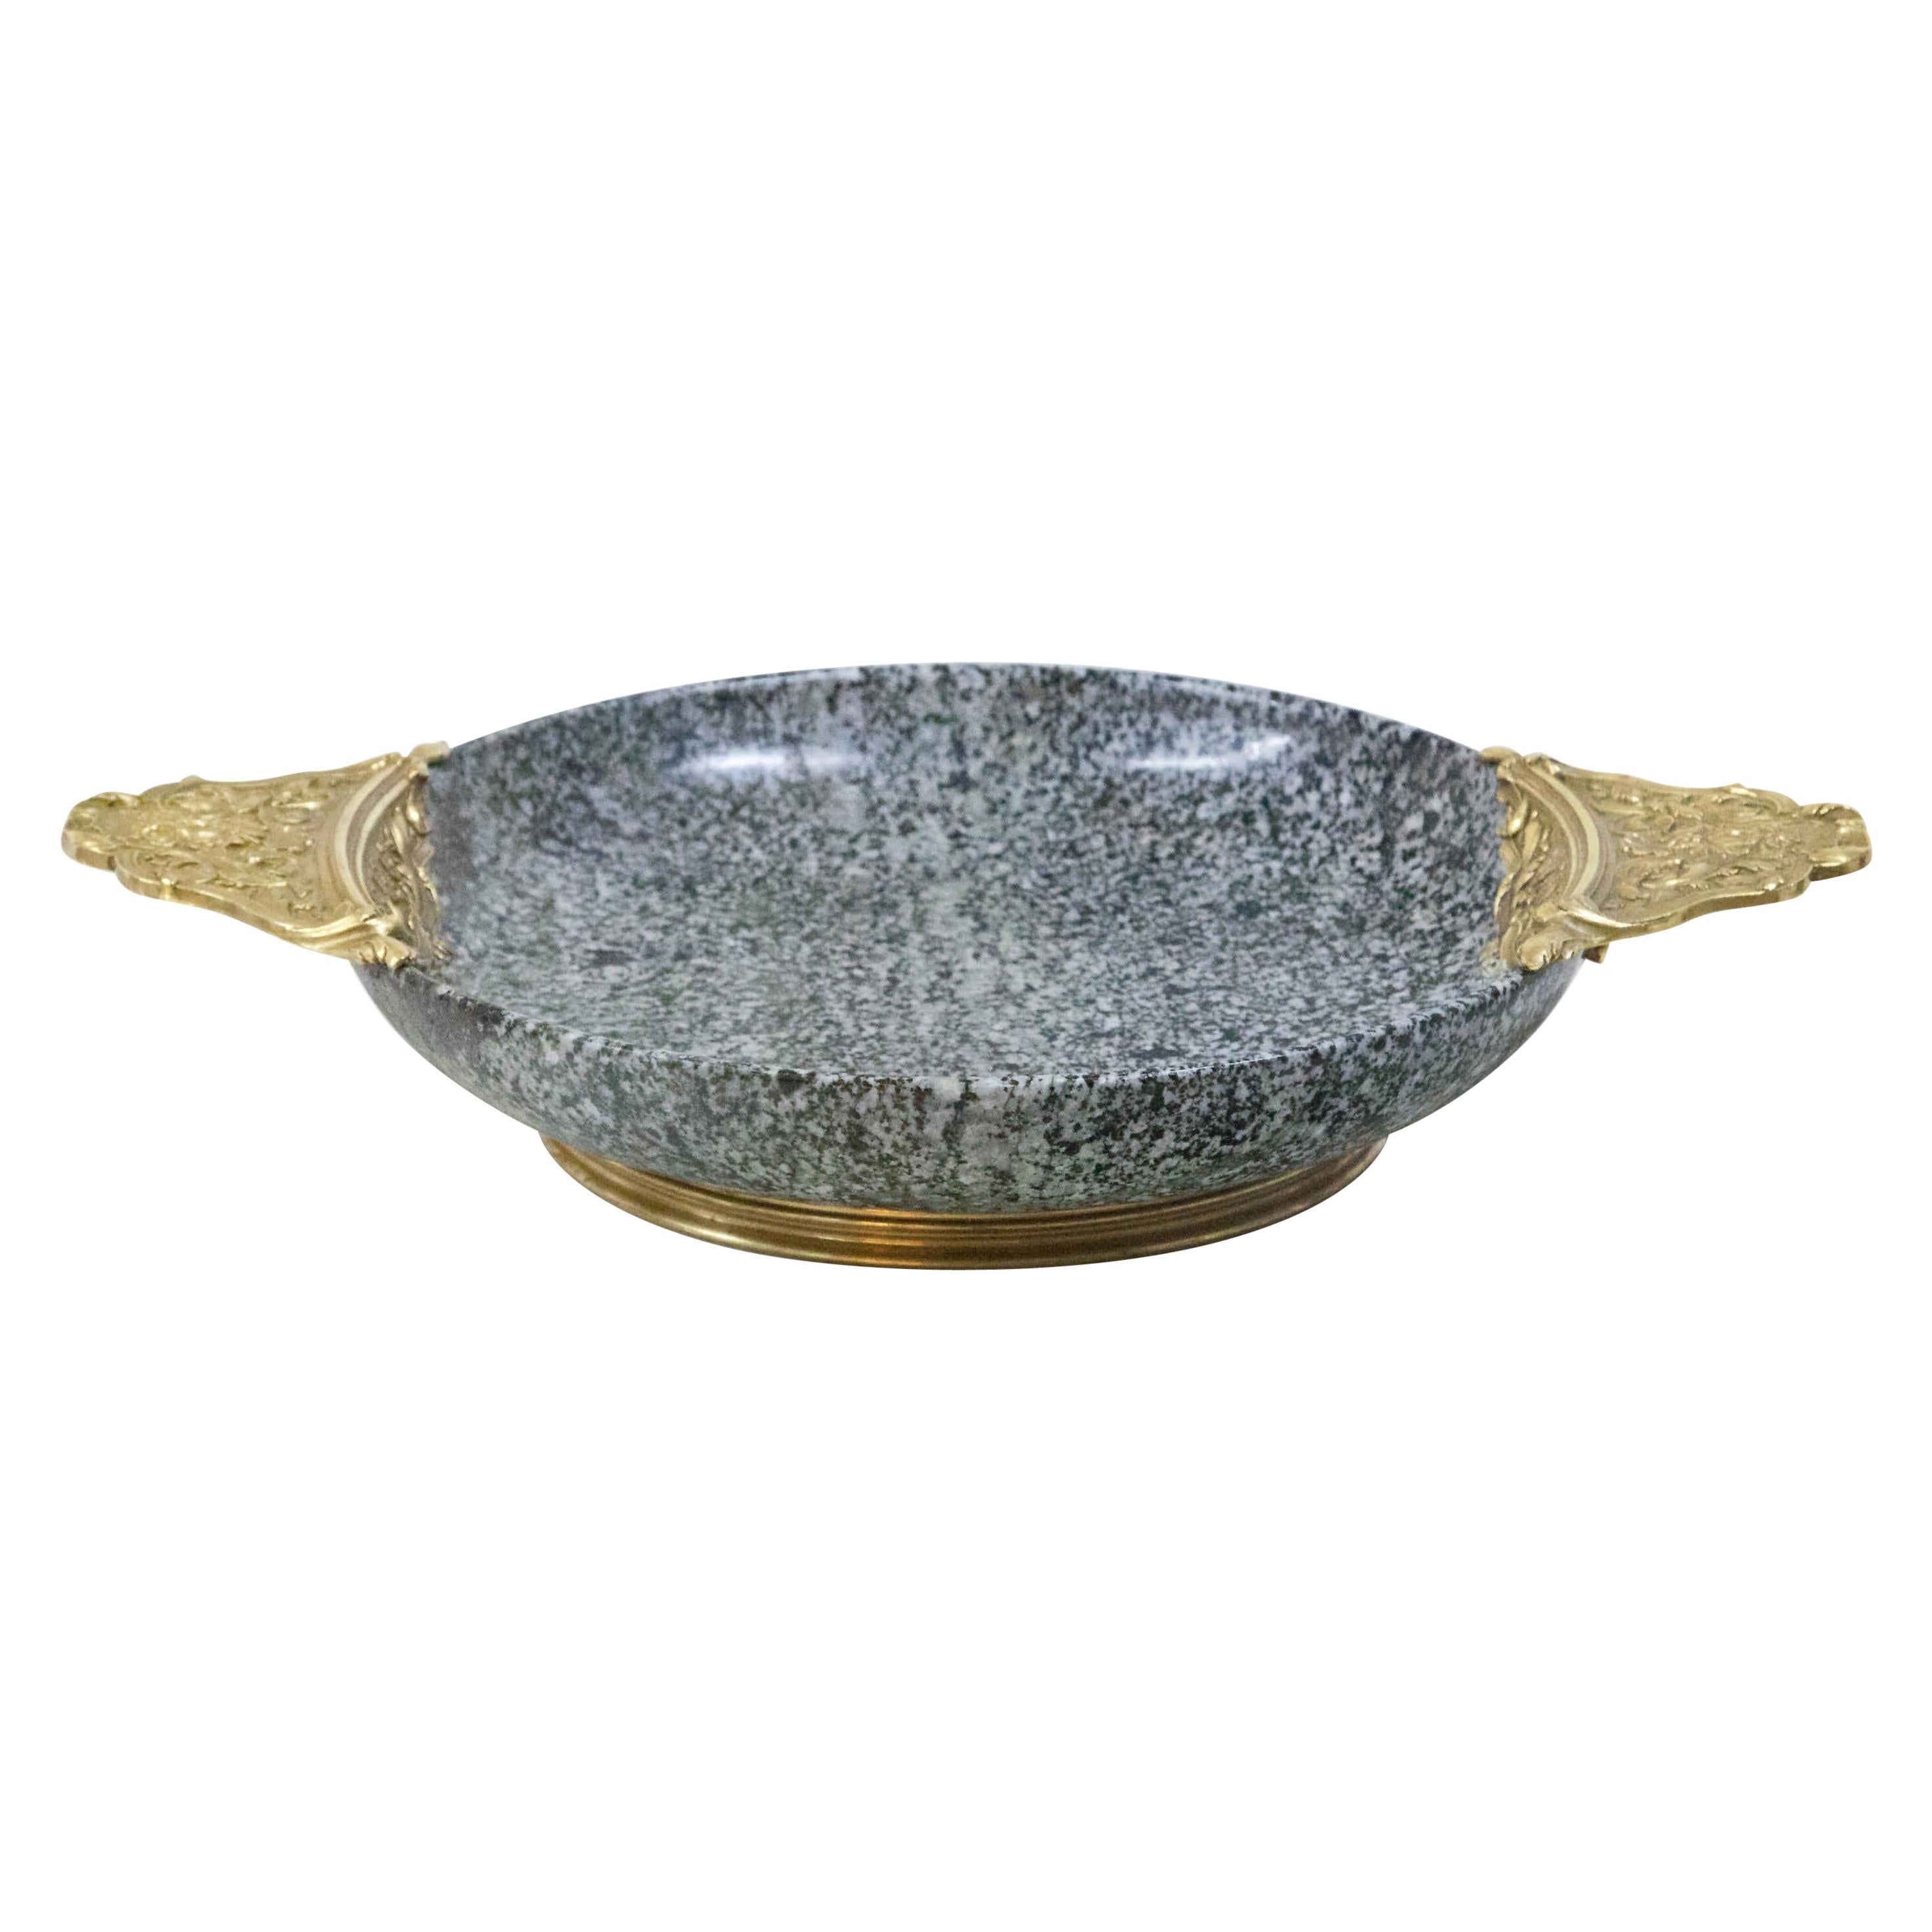 Bowl, Rome, 1st-3rd Century A.D. / France, Second Half of the 19th Century